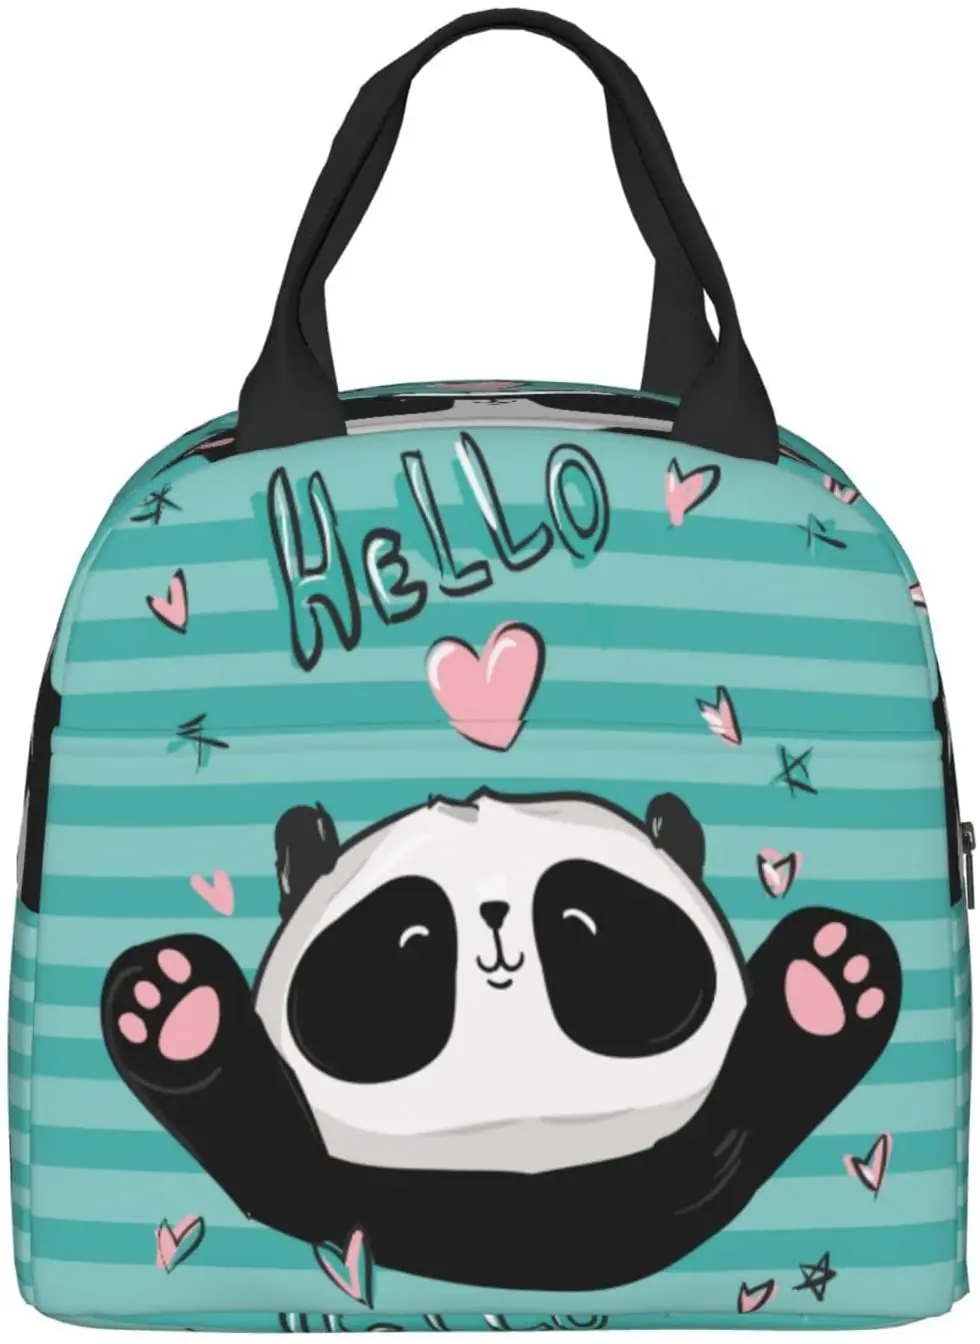 Hello Panda Lunch Box Insulated Lunch Bags for Kids Women Reusable Lunch Tote Bags, Perfect for School/Camping/Beach/Travel